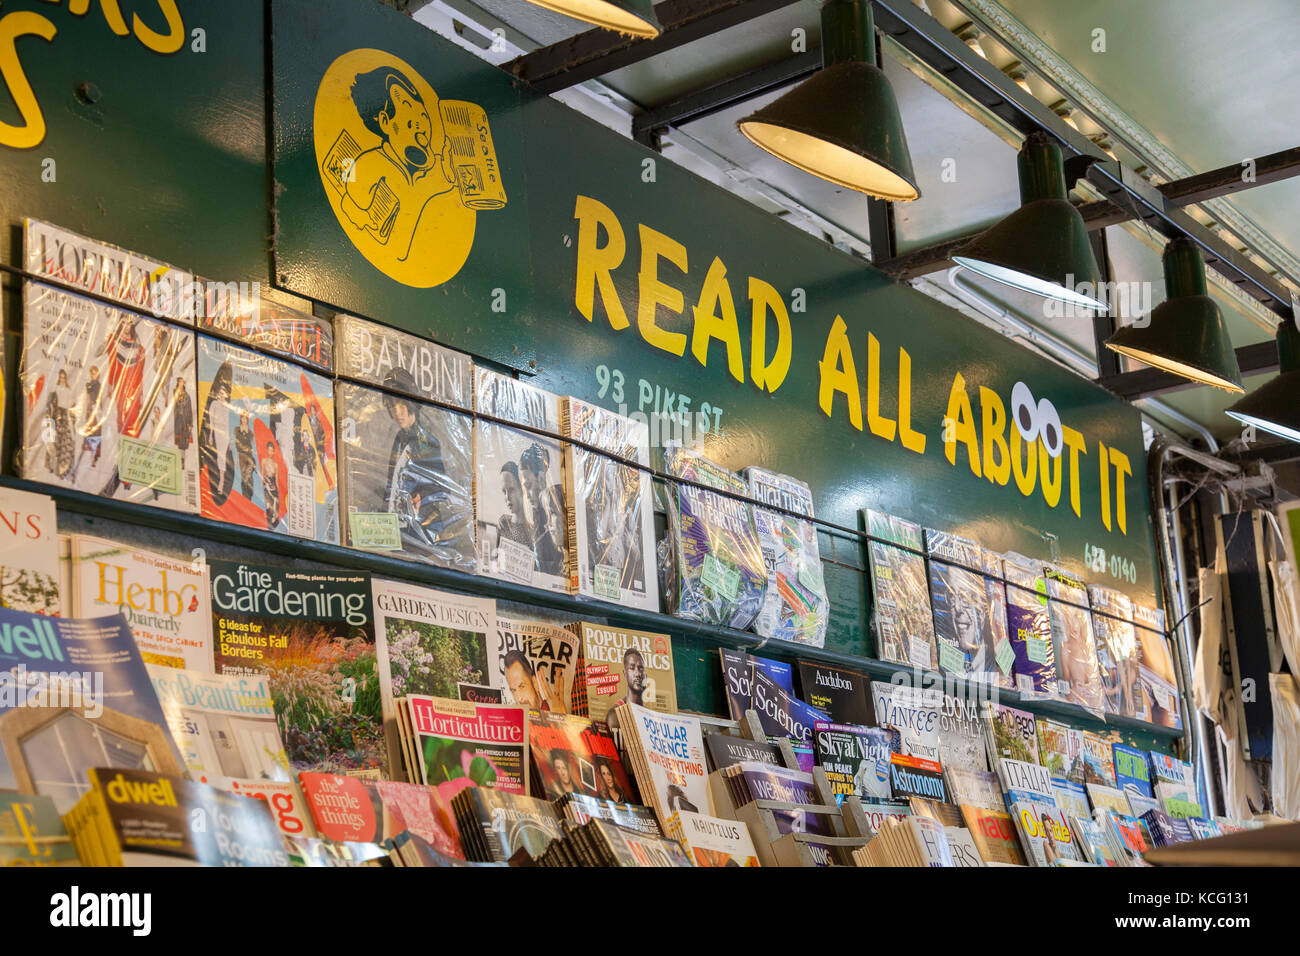 Newstand with magazines and newspapers for reading at Pikes Place Public Market center Seattle Washington Stock Photo